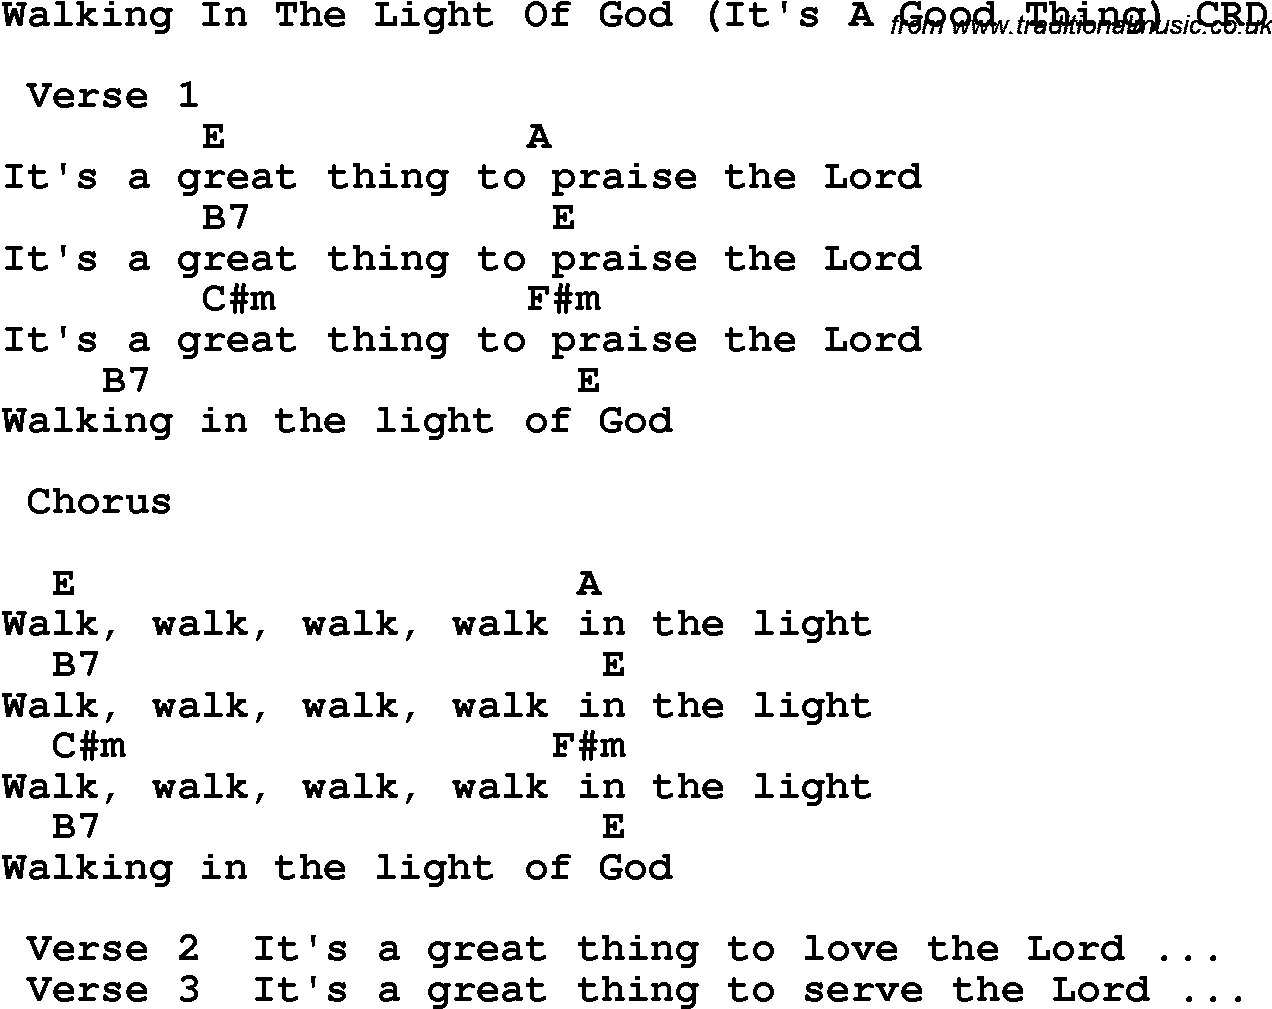 Christian Chlidrens Song Walking In The Light Of God It's A Good Thing CRD Lyrics & Chords